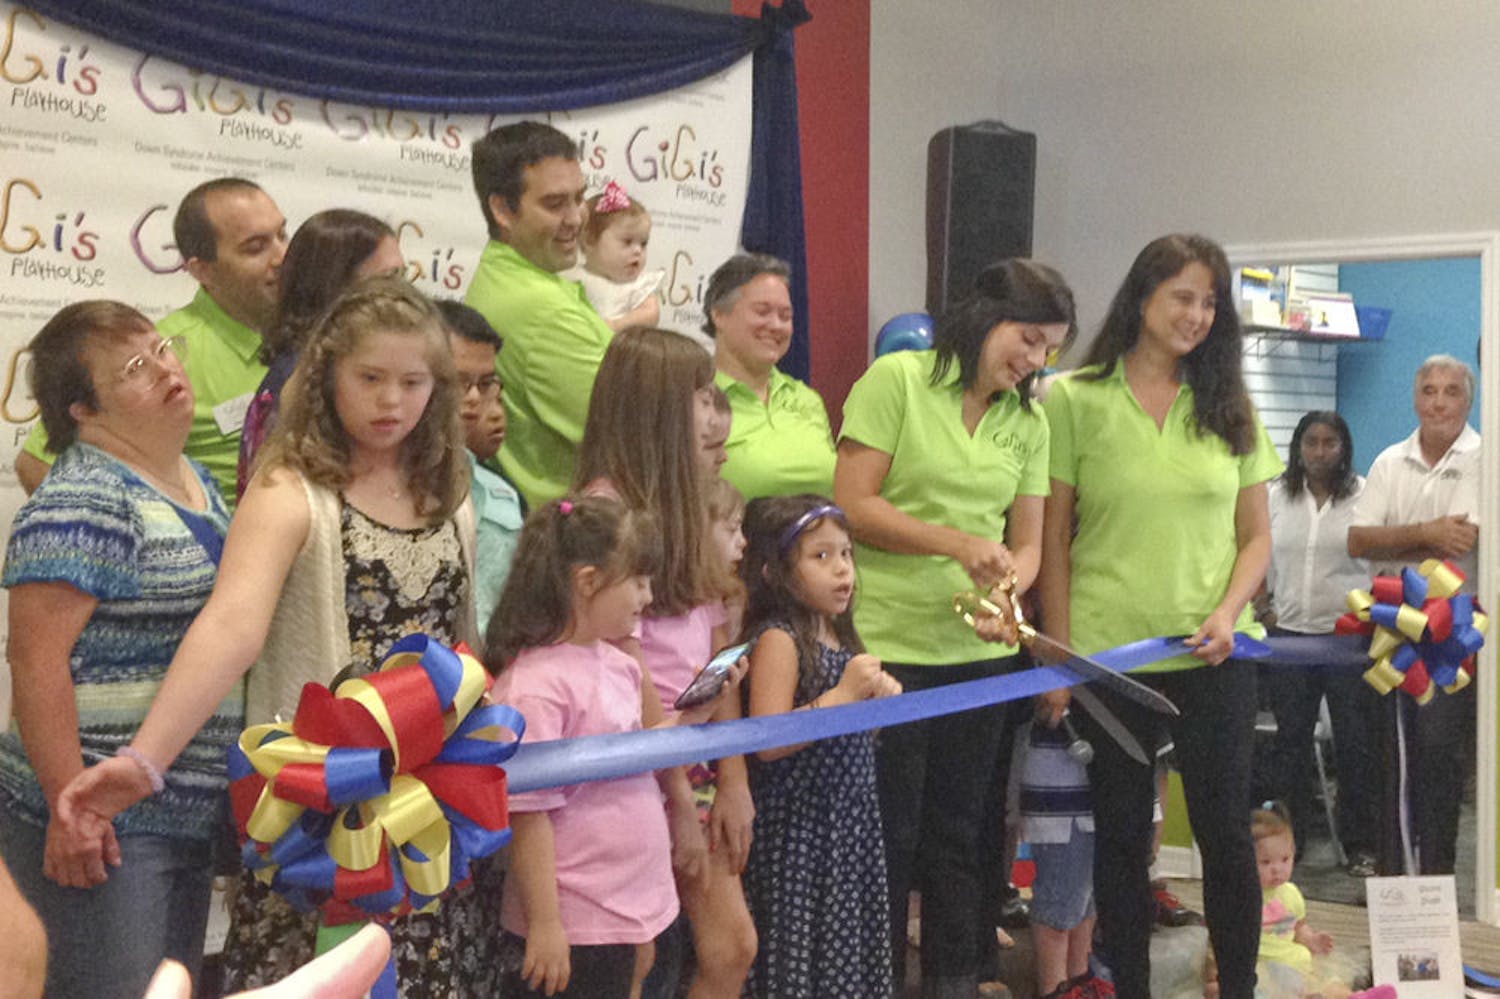 Addie Dalton, a board member for Gigi’s Playcenter, a nonprofit organization for children with Down Syndrome, snips a ribbon at the center’s grand opening on Oct. 11, 2015. The center provides a space for children and families with down syndrome to build confidence through learning, performing and socializing.